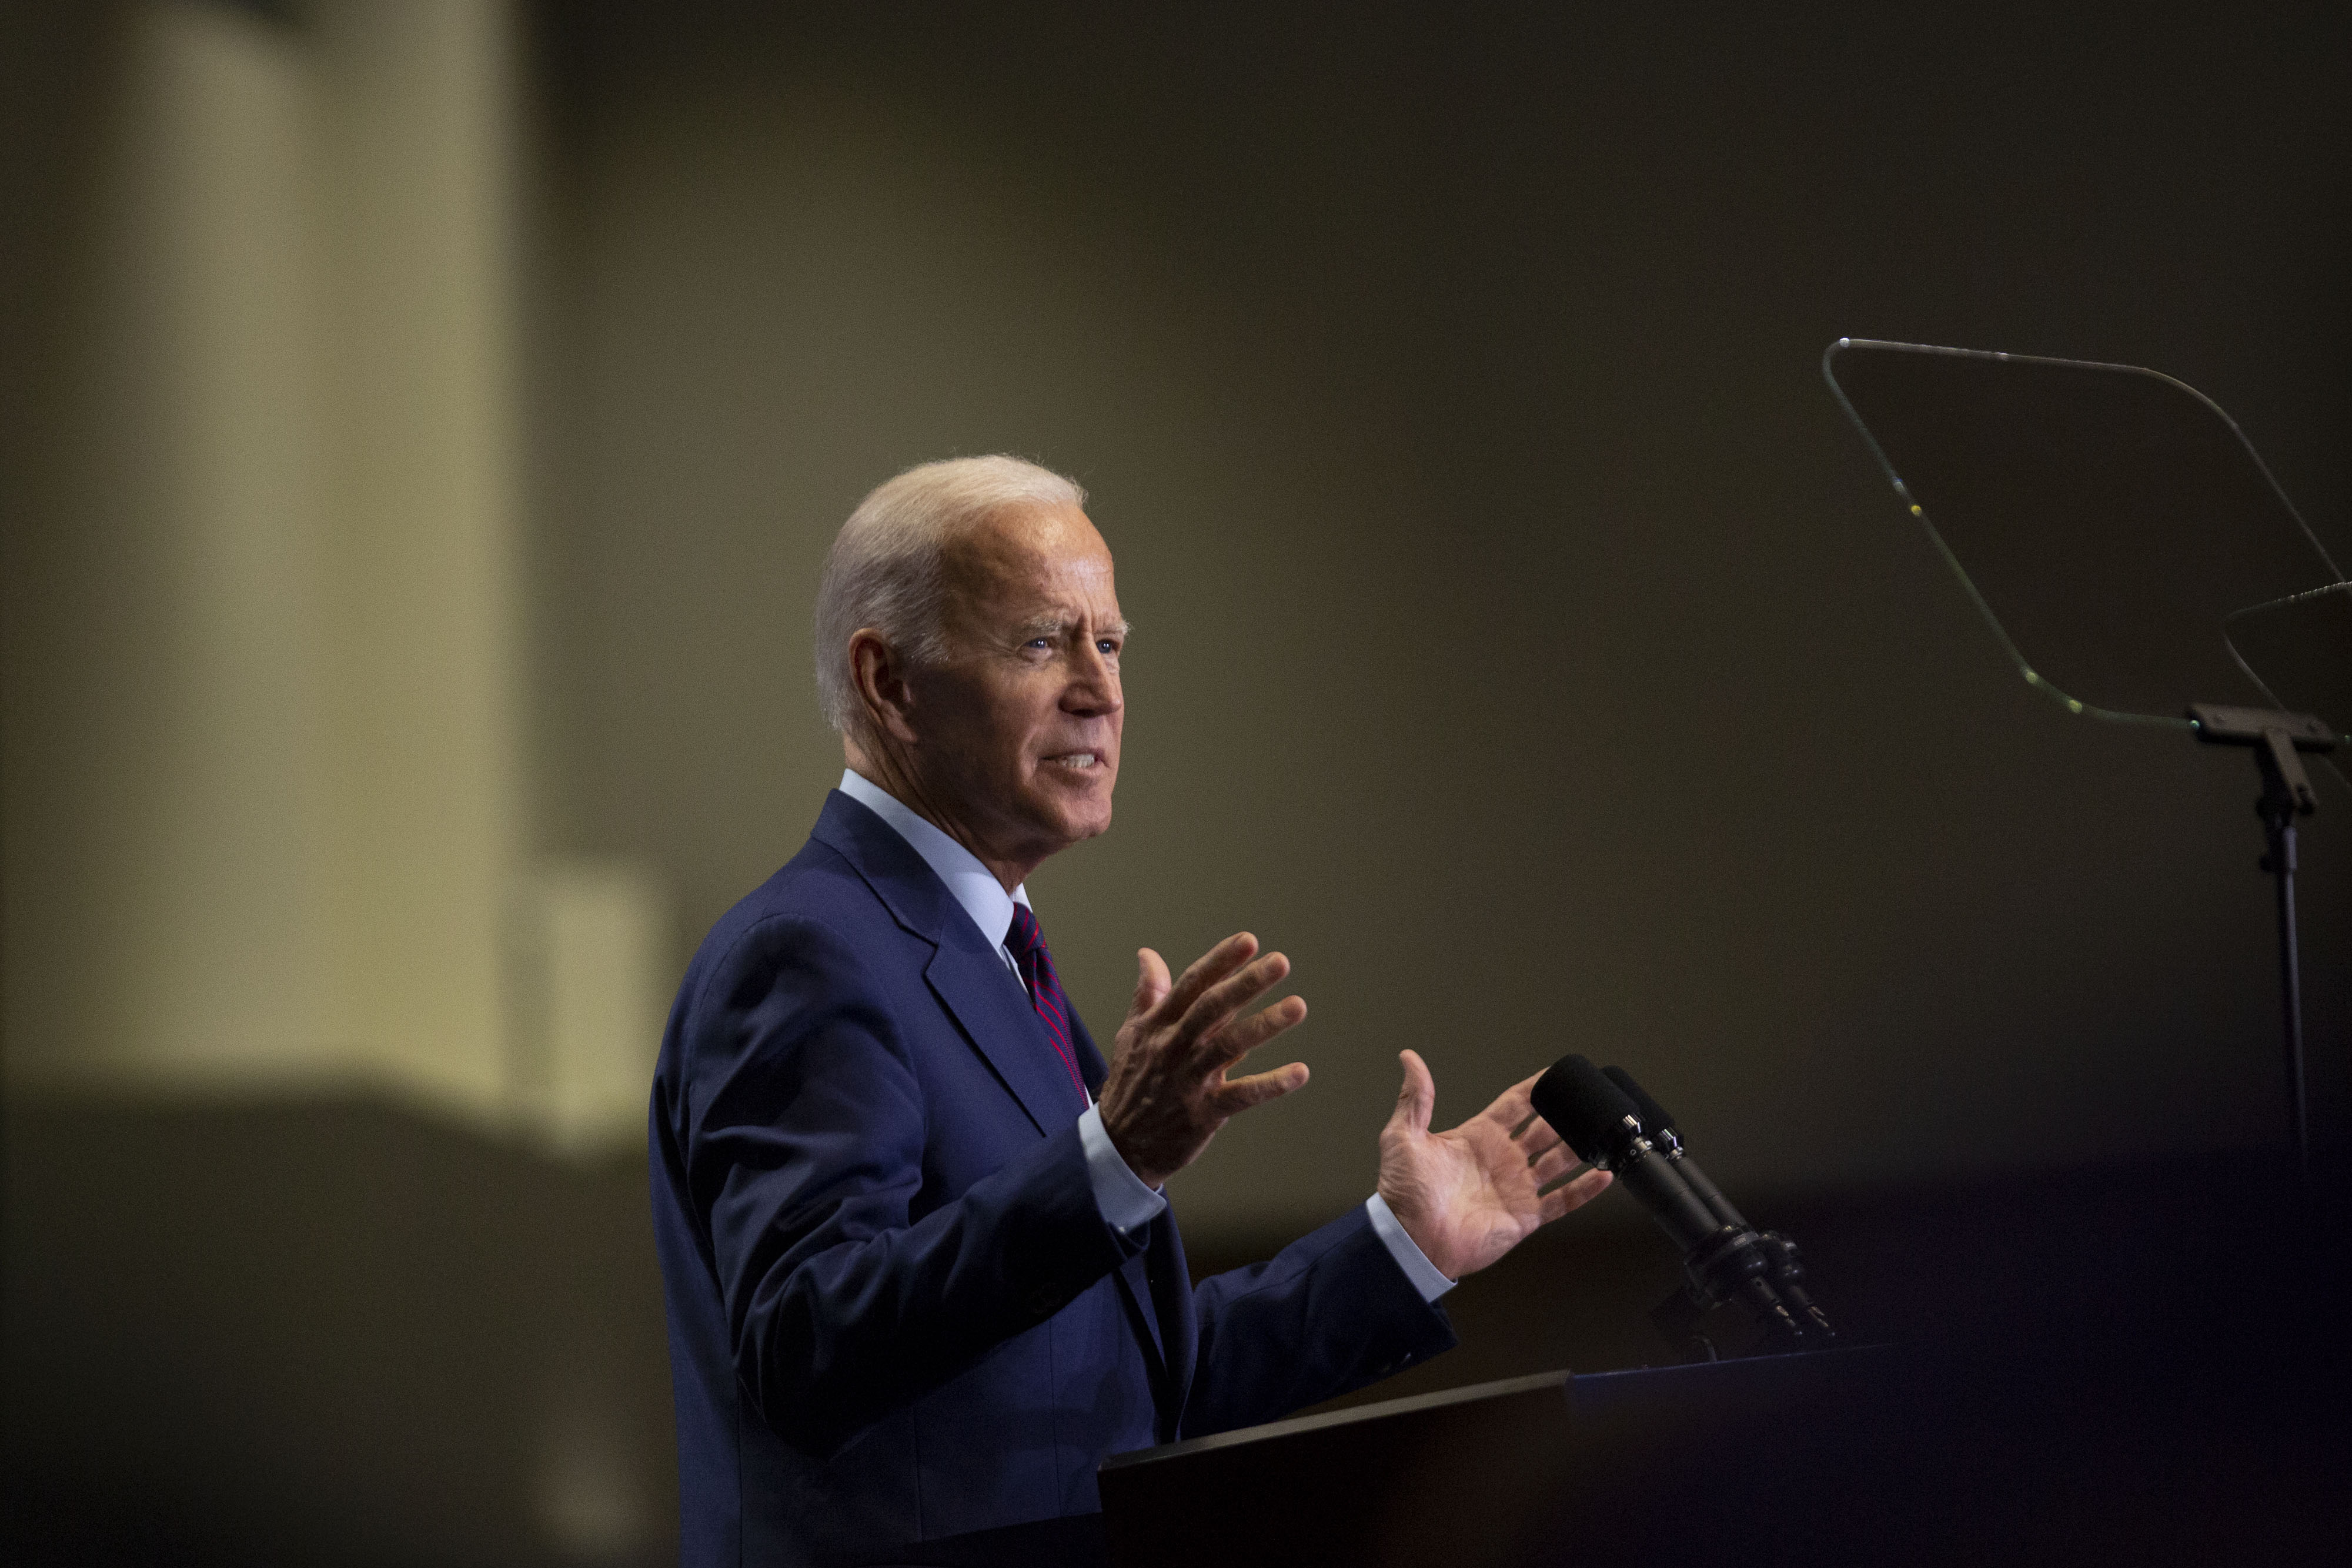 Former U.S. Vice President Joe Biden, a 2020 Democratic presidential candidate, speaks during the Rainbow PUSH Coalition Annual International Convention in Chicago, Illinois, U.S., on Friday, June 28, 2019. (Daniel Acker—Bloomberg/Getty Images)